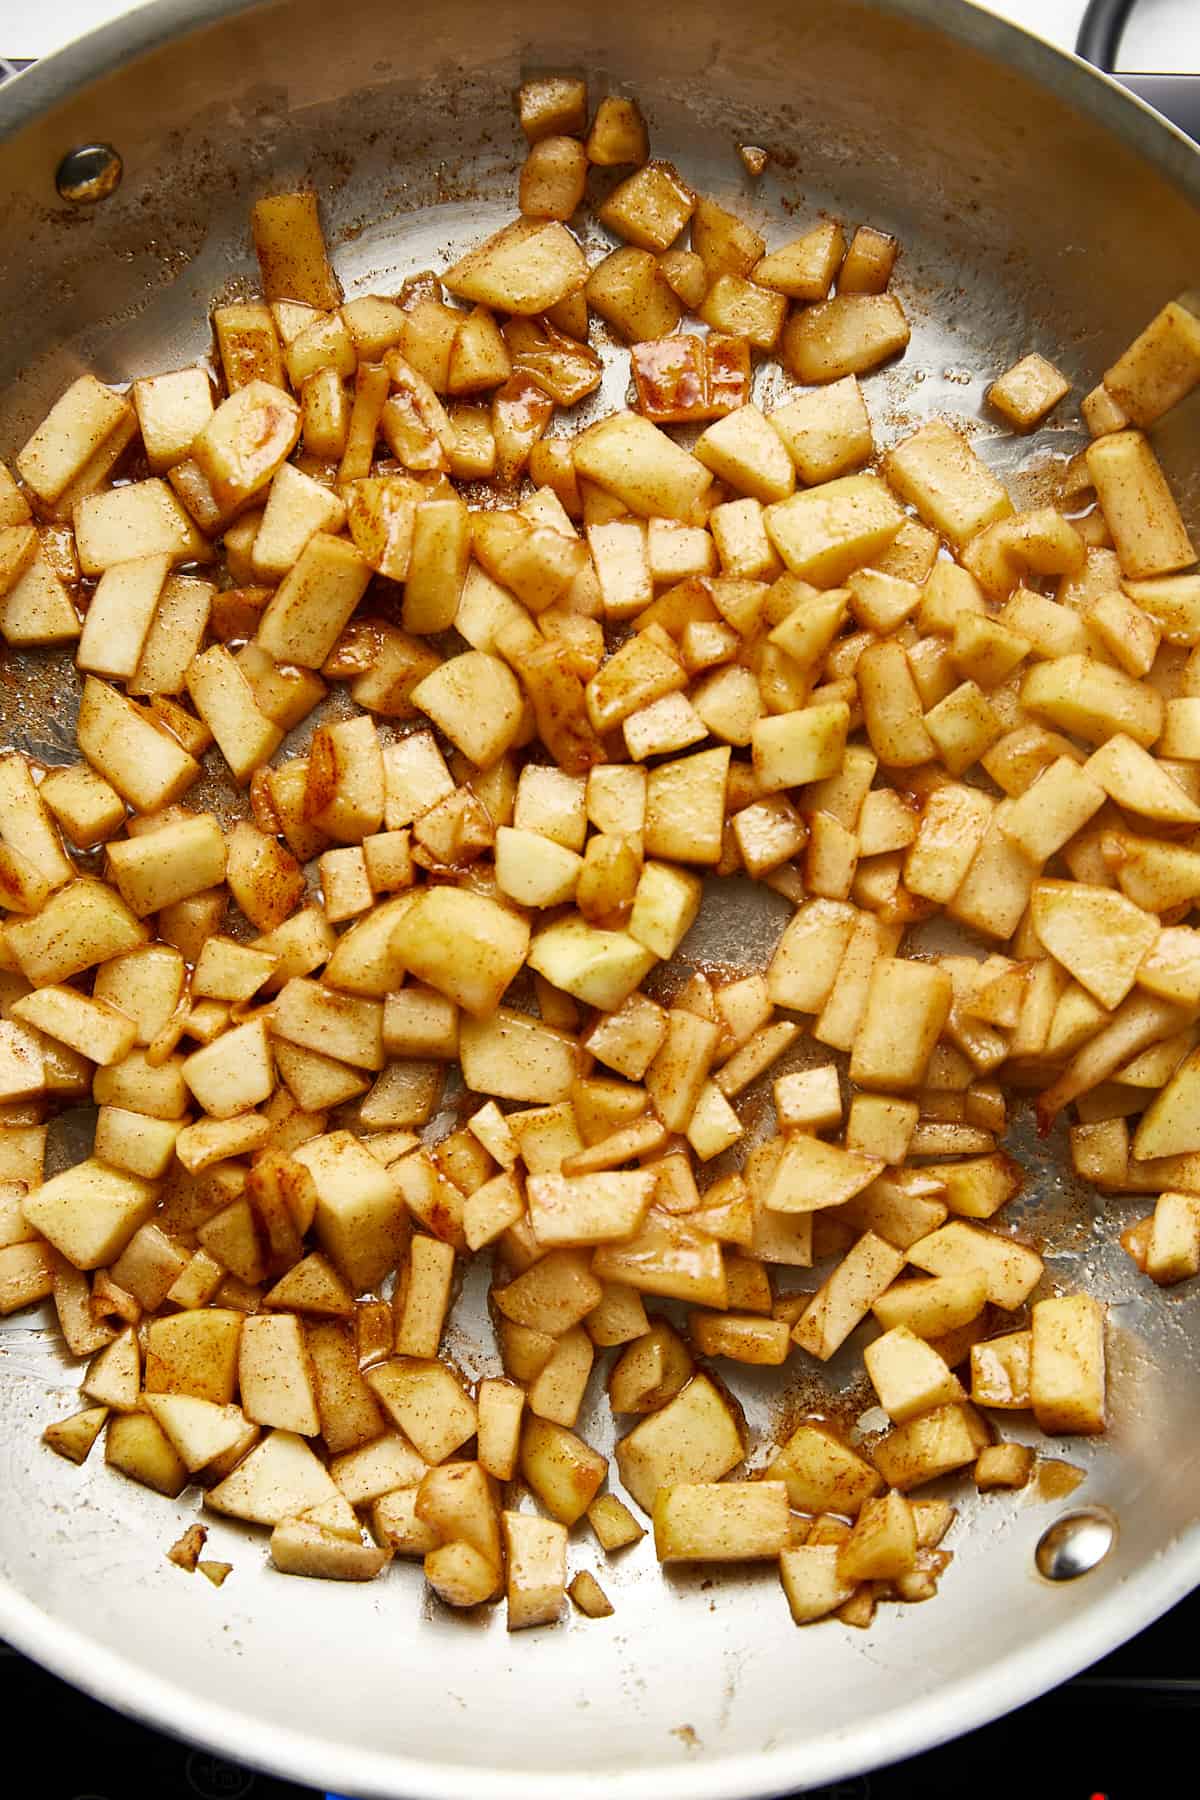 sautéed apples with butter, cinnamon, and brown sugar in a stainless steel pan.